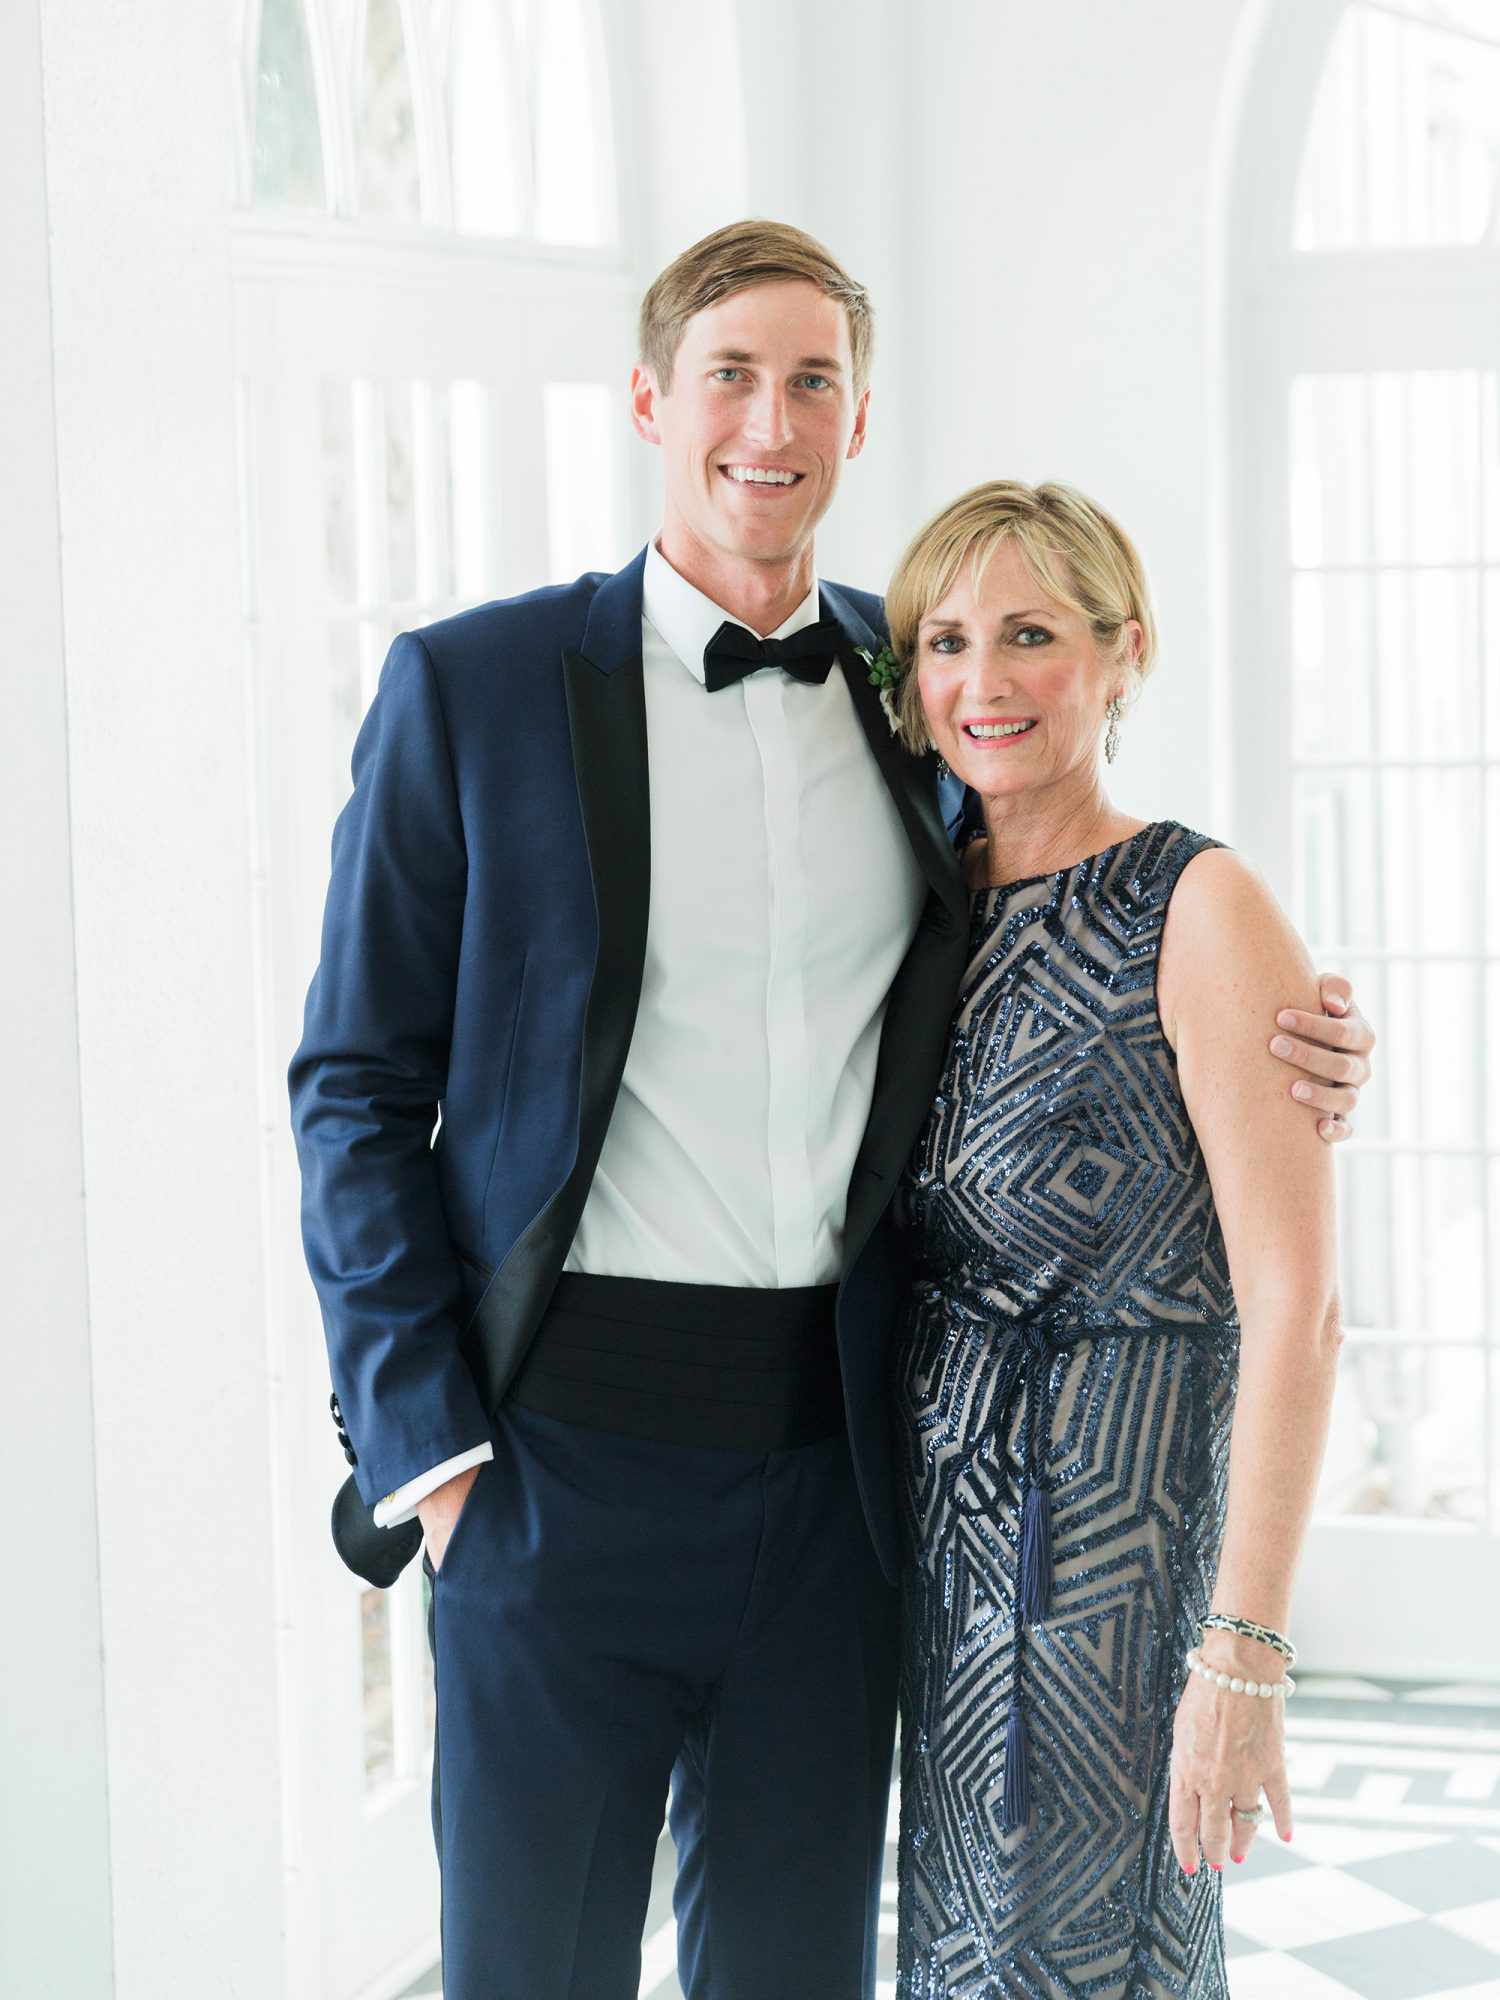 Where Should the Groom's Mother Get Ready for the Wedding? | Martha Stewart